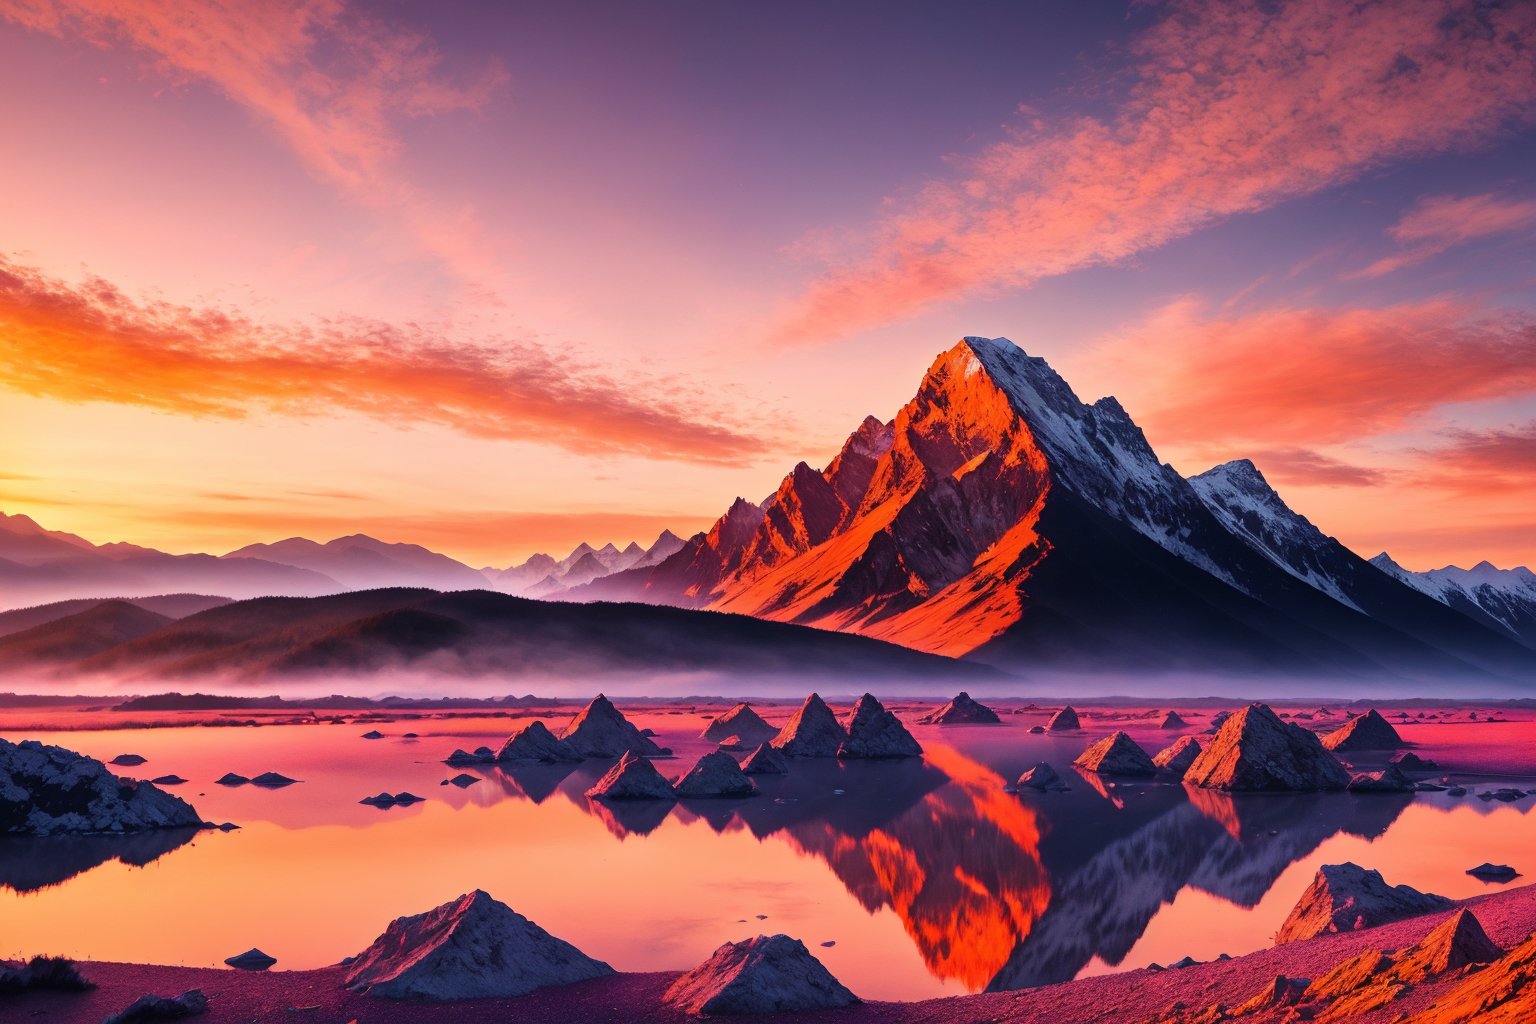 A towering mountain range made entirely of crystal, shimmering under the light of a setting sun that paints the sky in hues of pink and orange